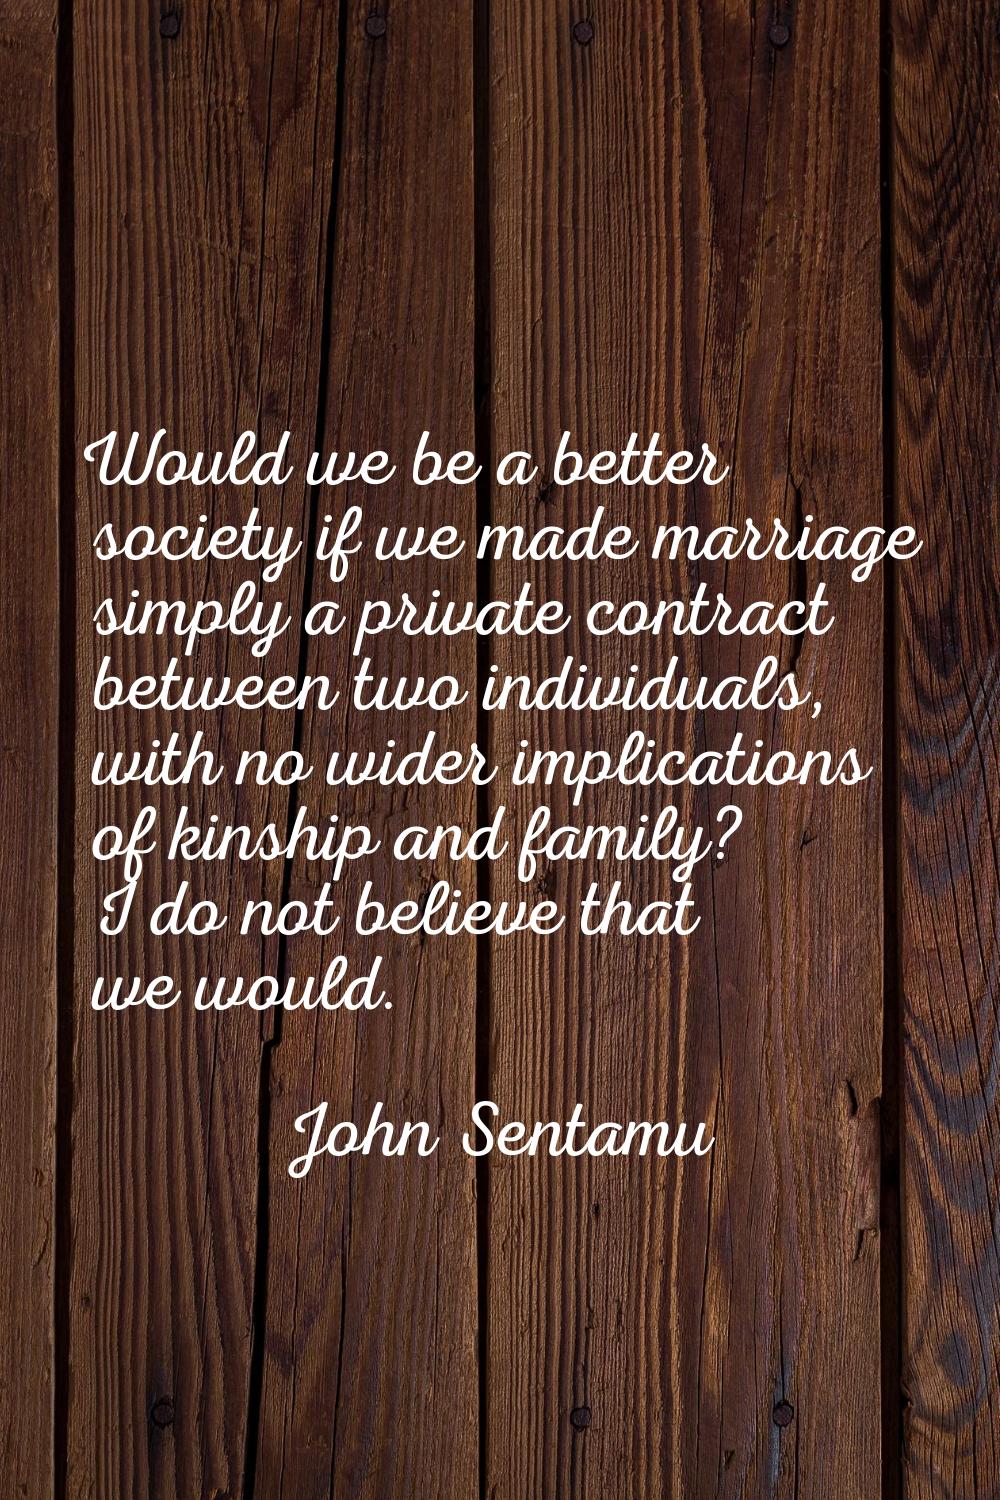 Would we be a better society if we made marriage simply a private contract between two individuals,